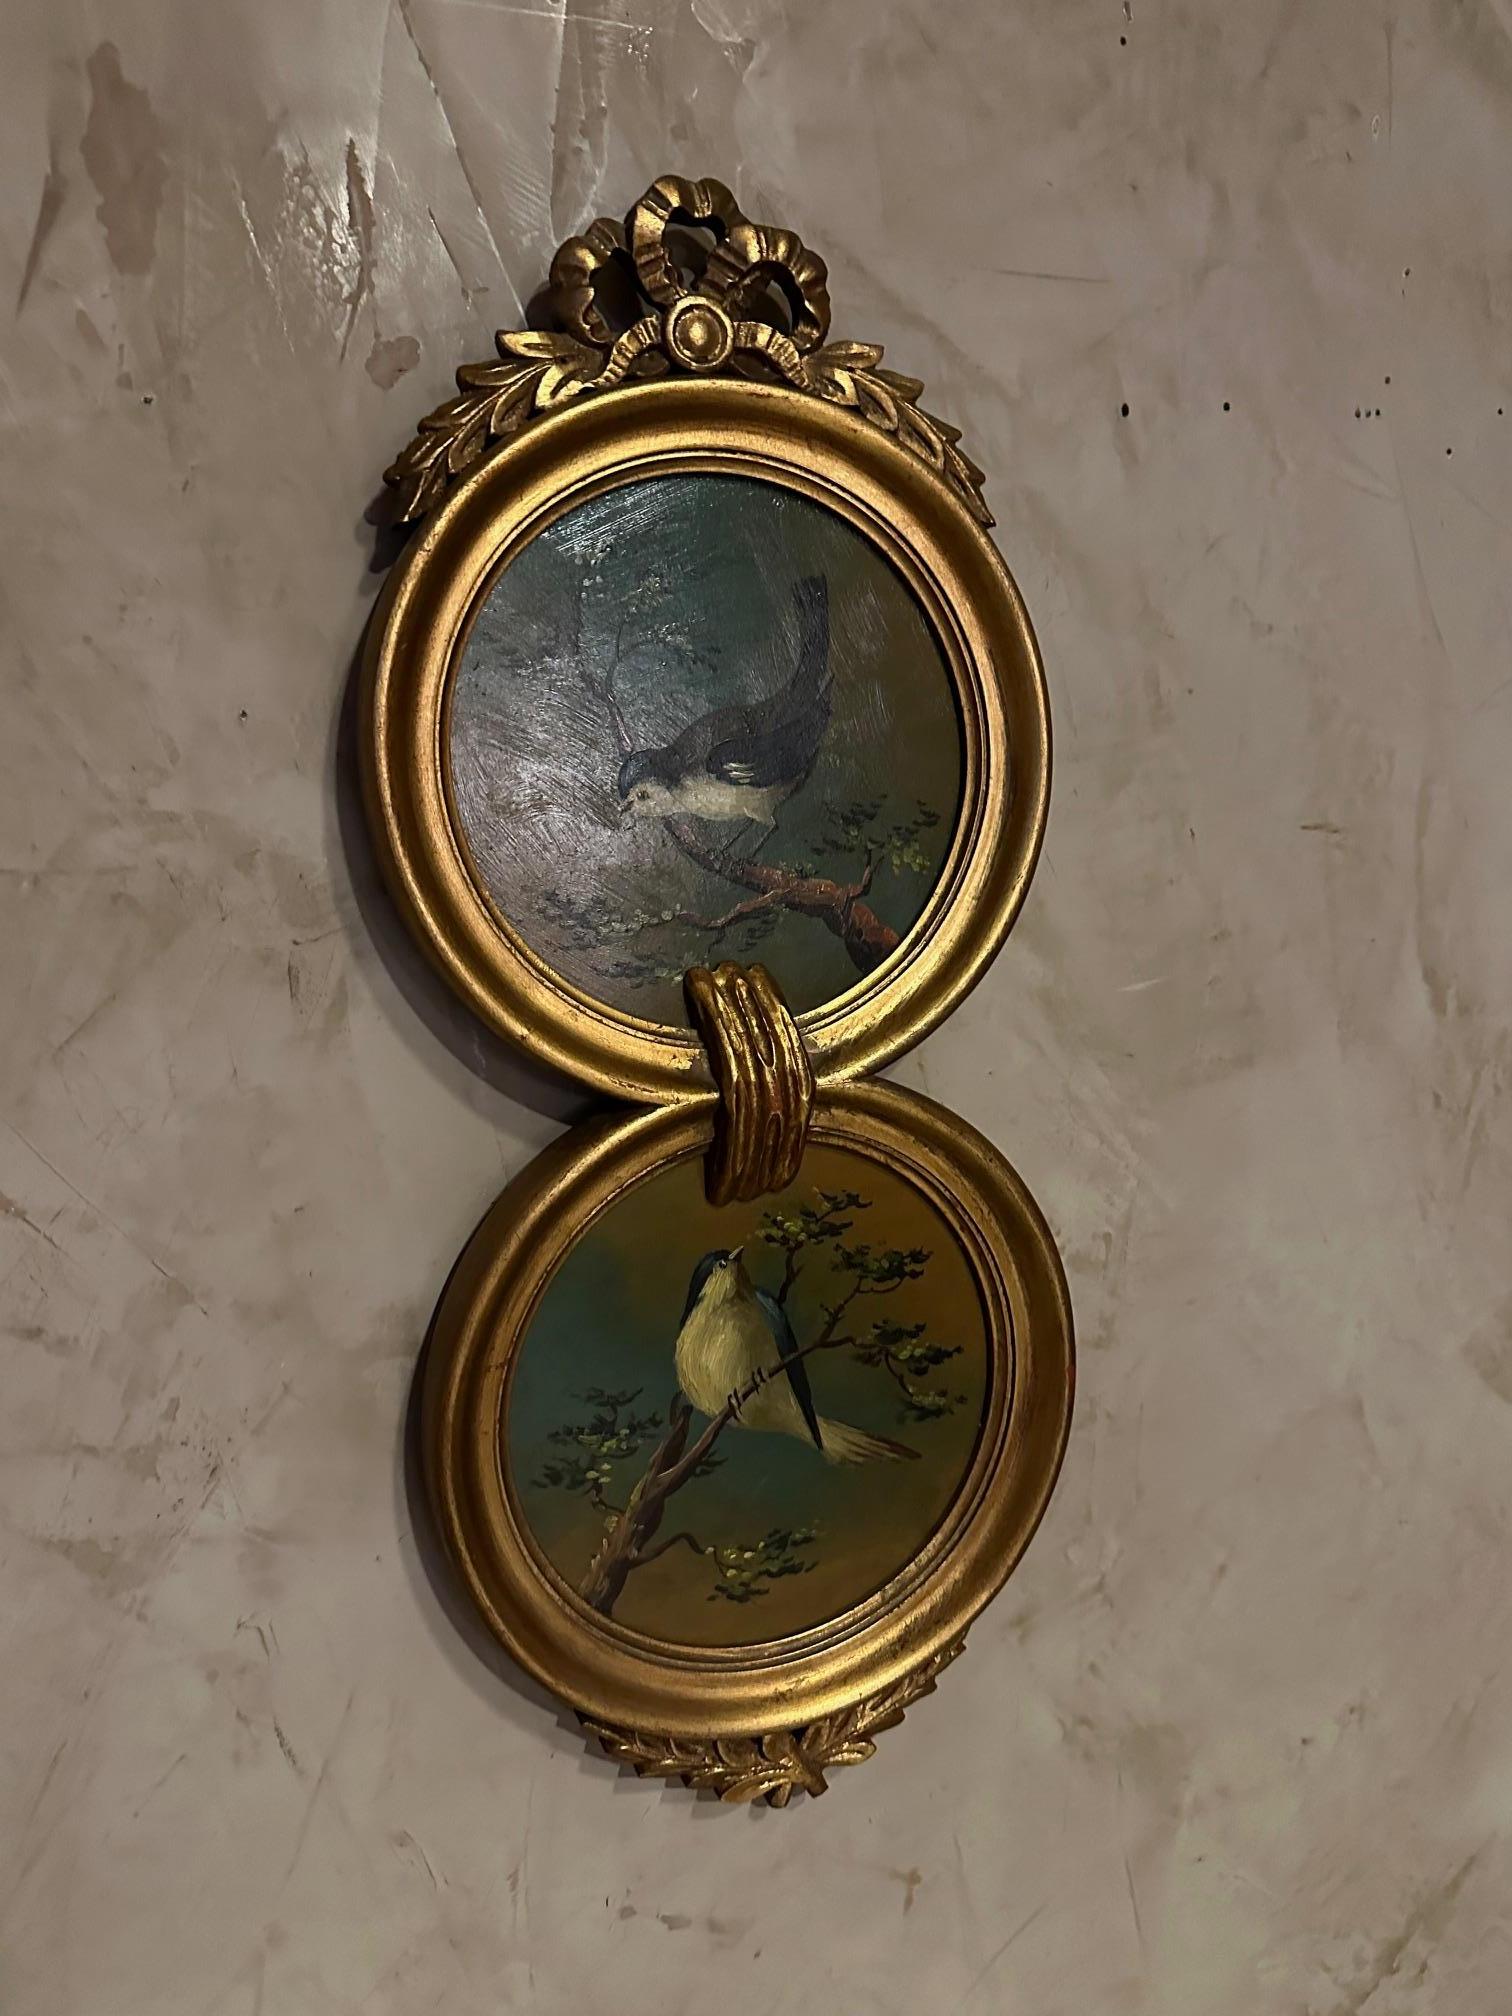 Charming and romantique painting in the shape of a double circle with oil on hardboard representing sparrows. Delicate and romantic painting. 
Louis XV style frame with a bow on the top. Nice quality.